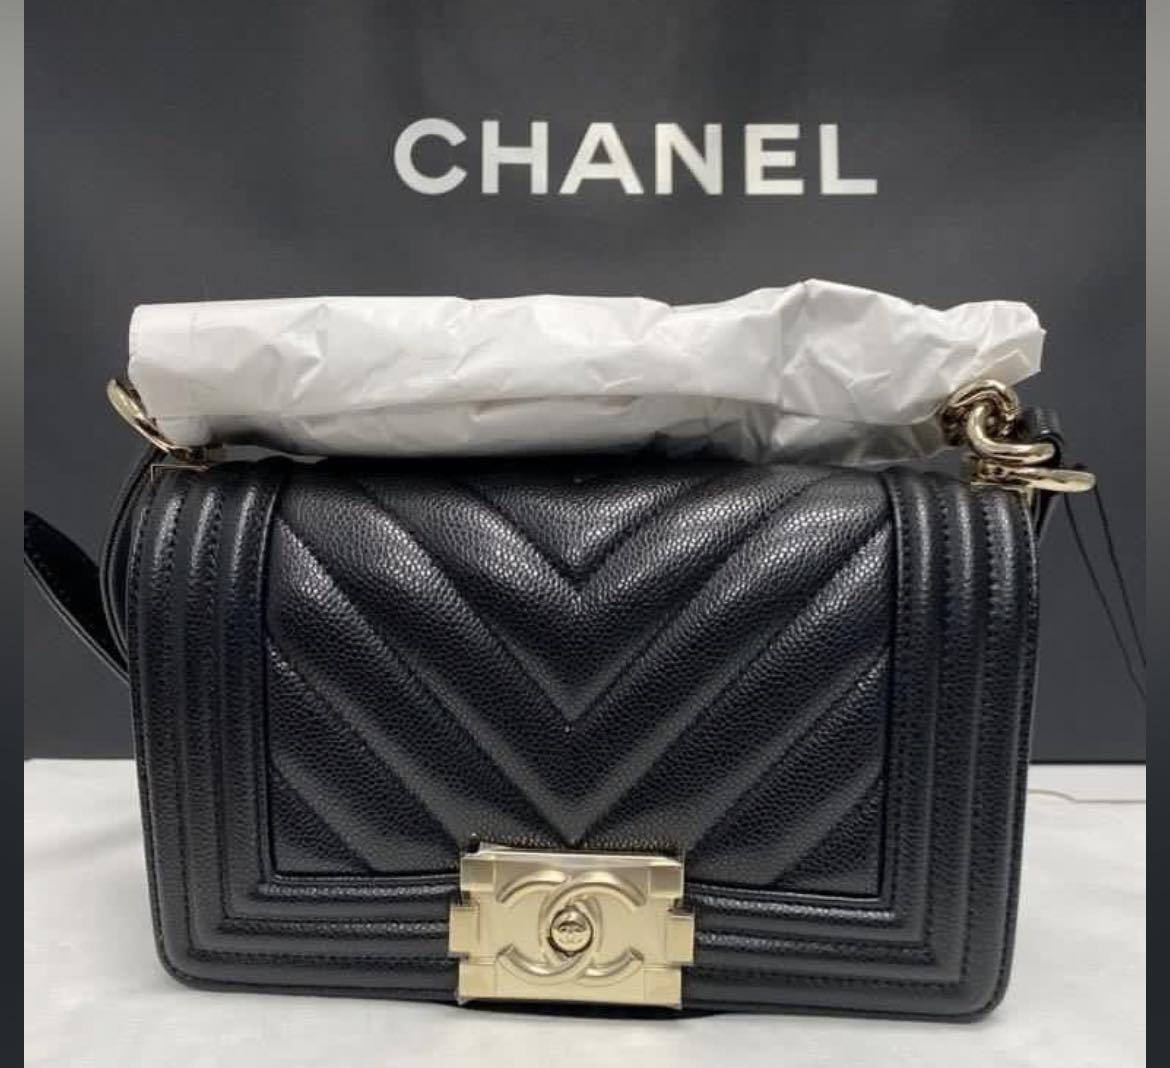 Chanel Calfskin Leather Large Hobo Crossbody Bag Tan with Ruthenium  Hardware - Luxury In Reach